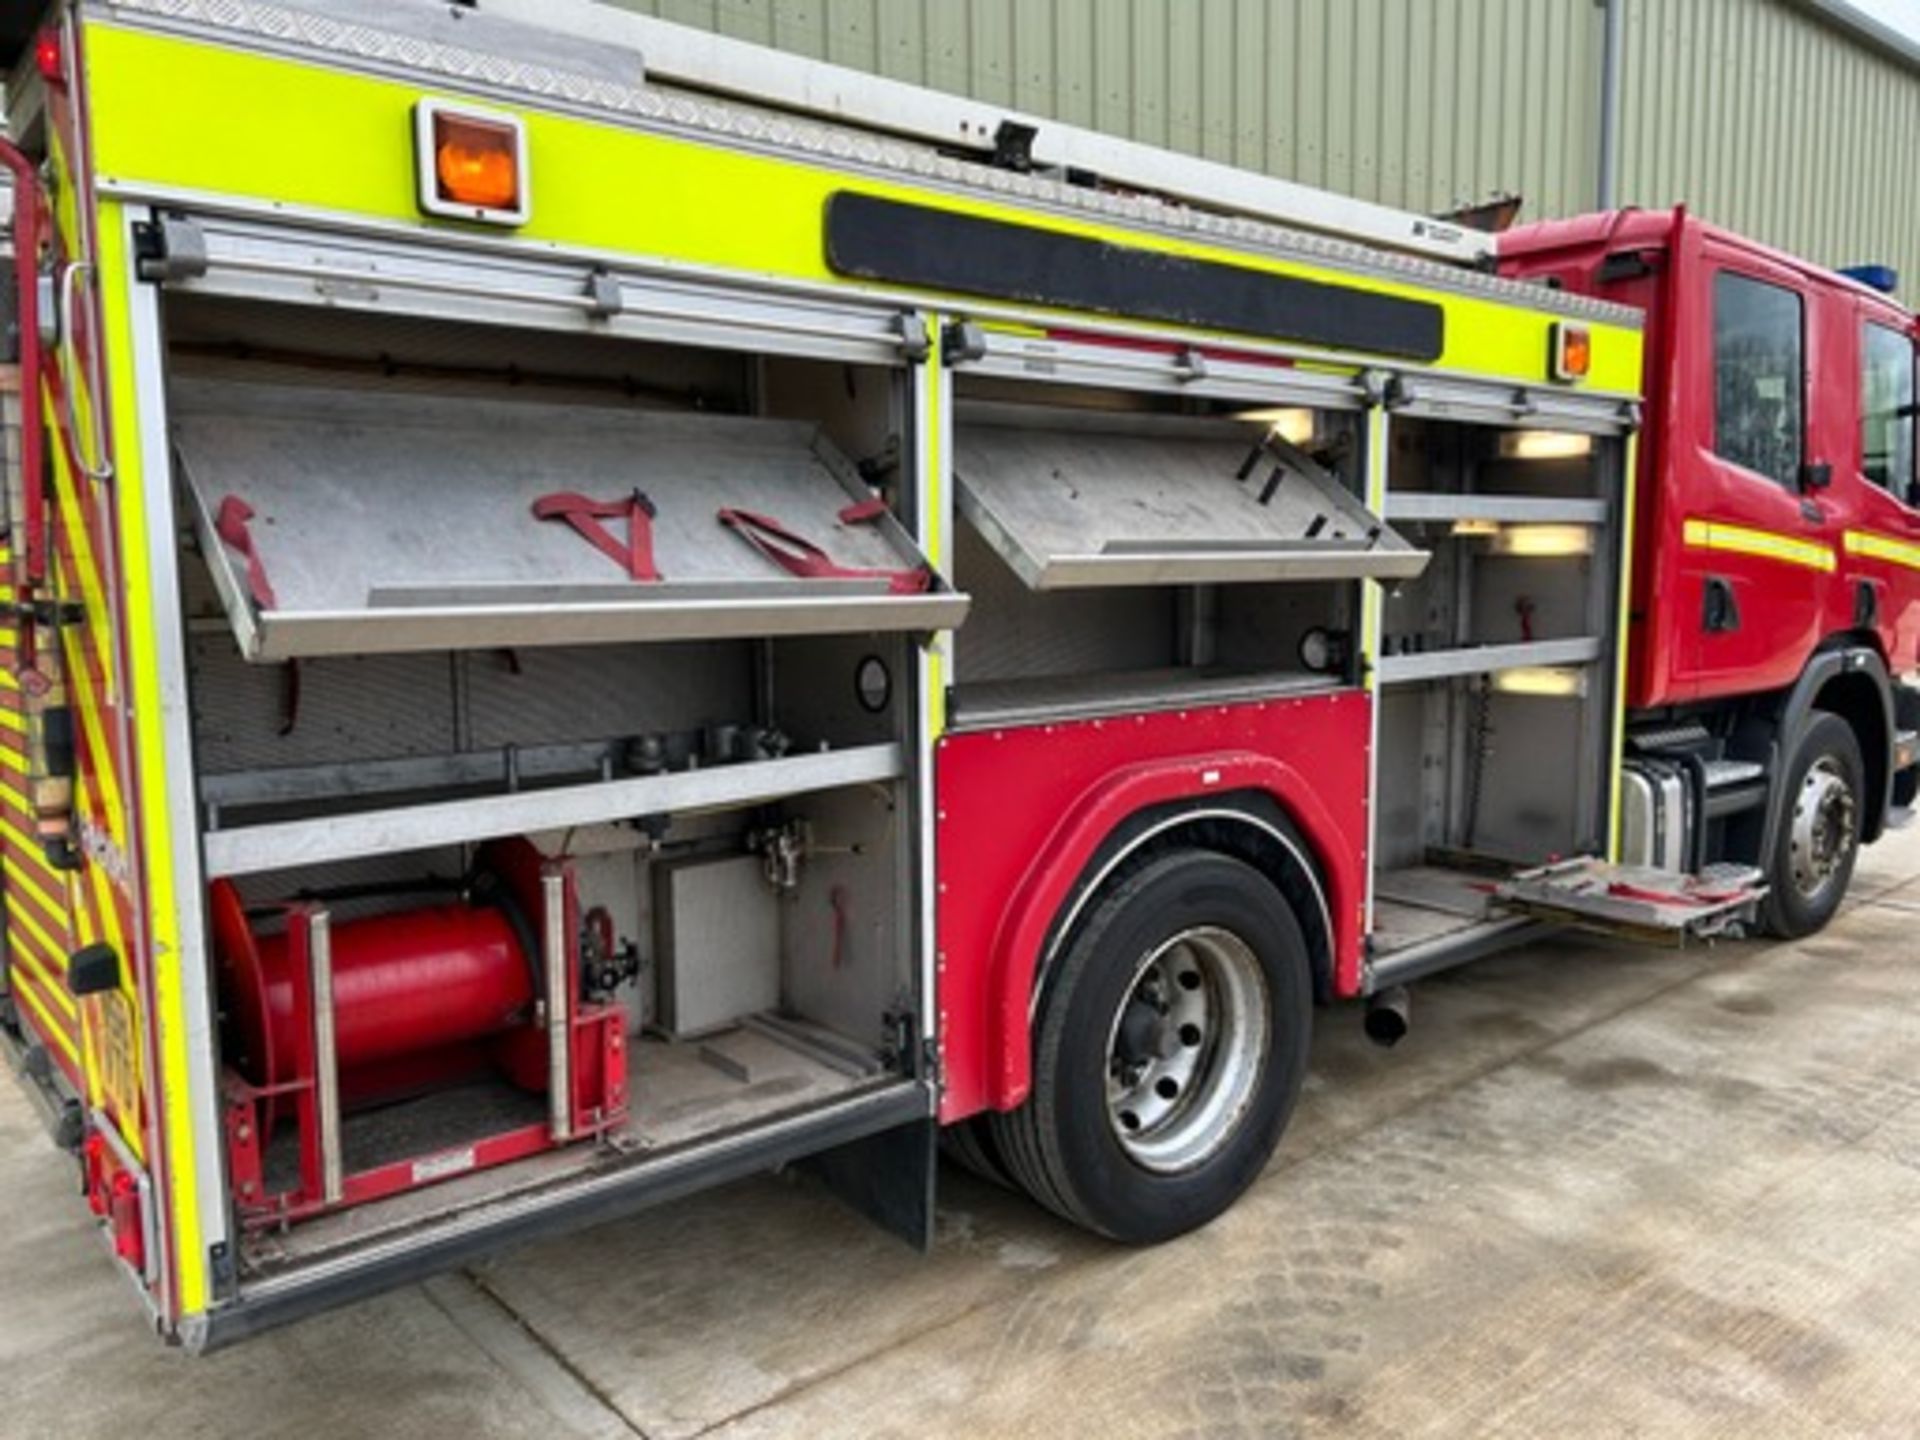 Scania Excalibur 94D 260 Fire Appliance - Image 12 of 26